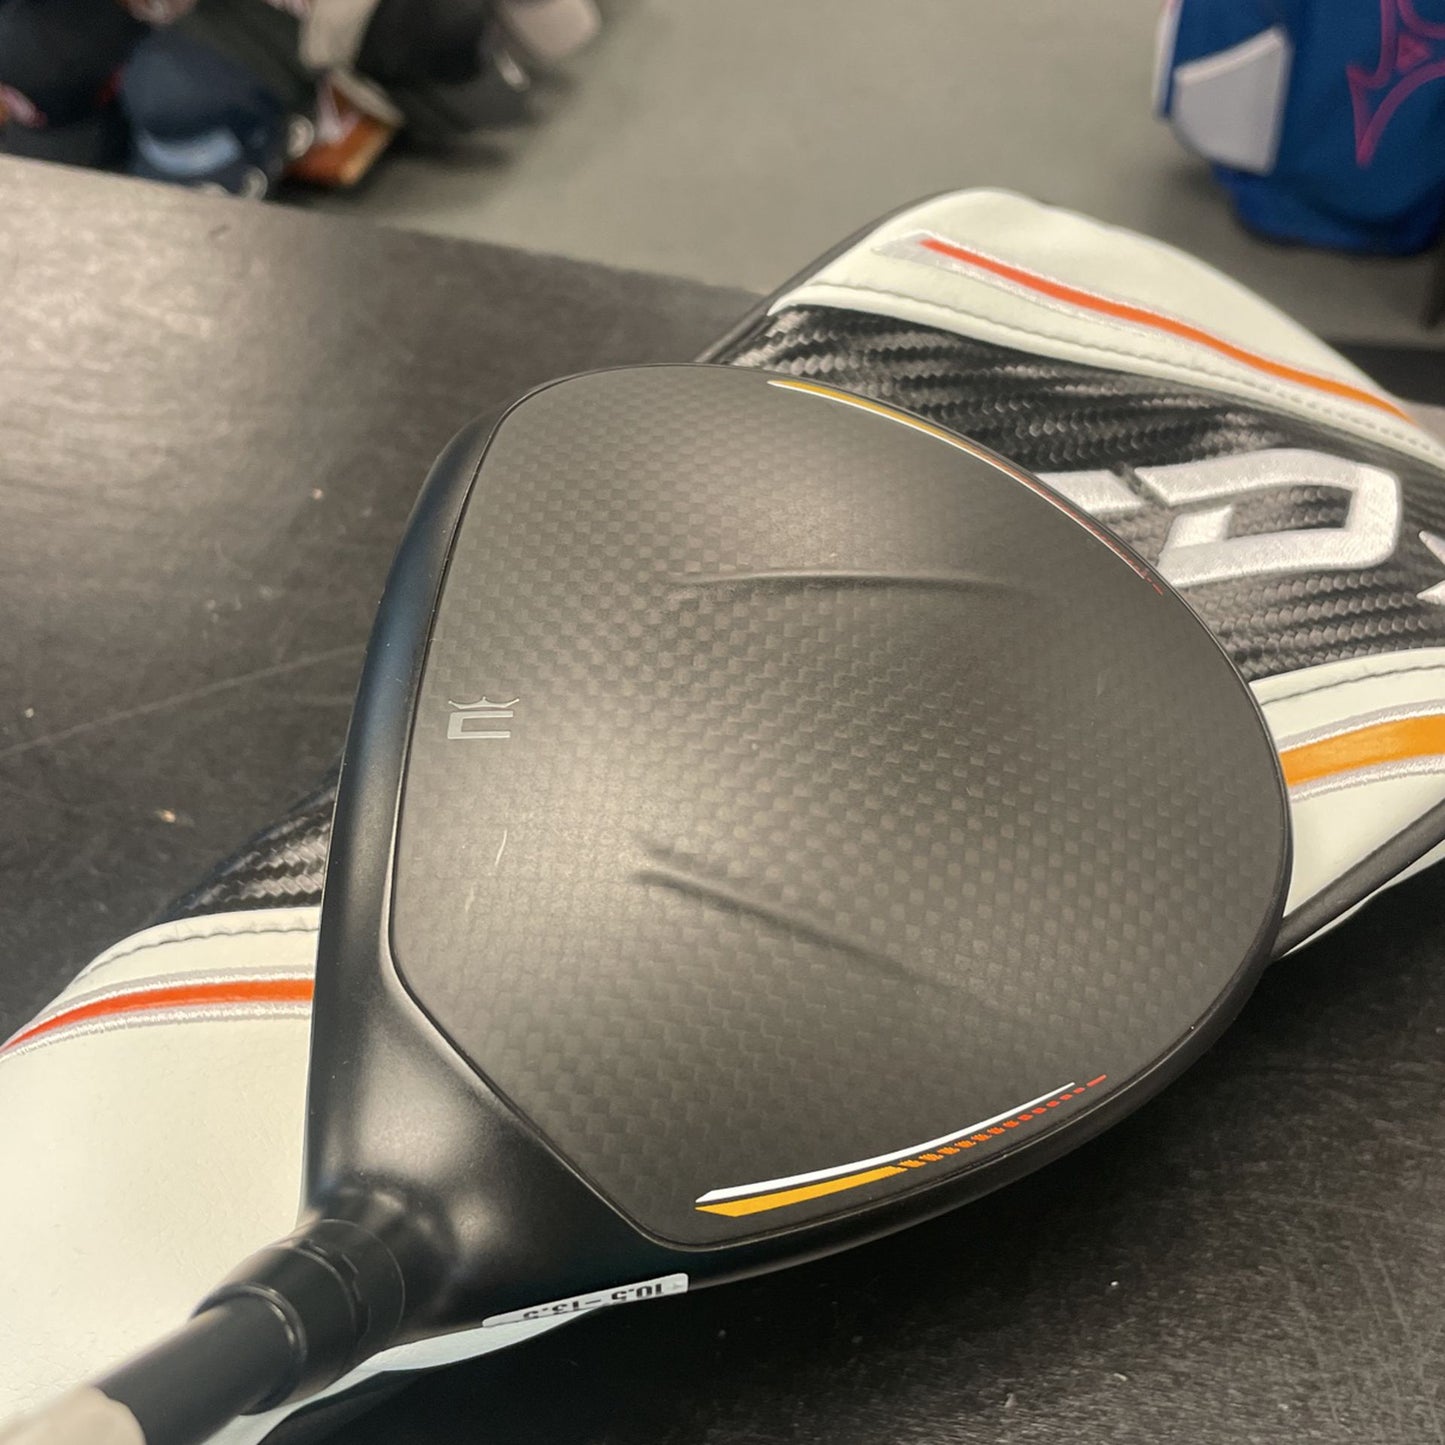 New-Cobra-King-LTDx-Max-Driver-12-degree-right-hand-regular-flex-with-headcover